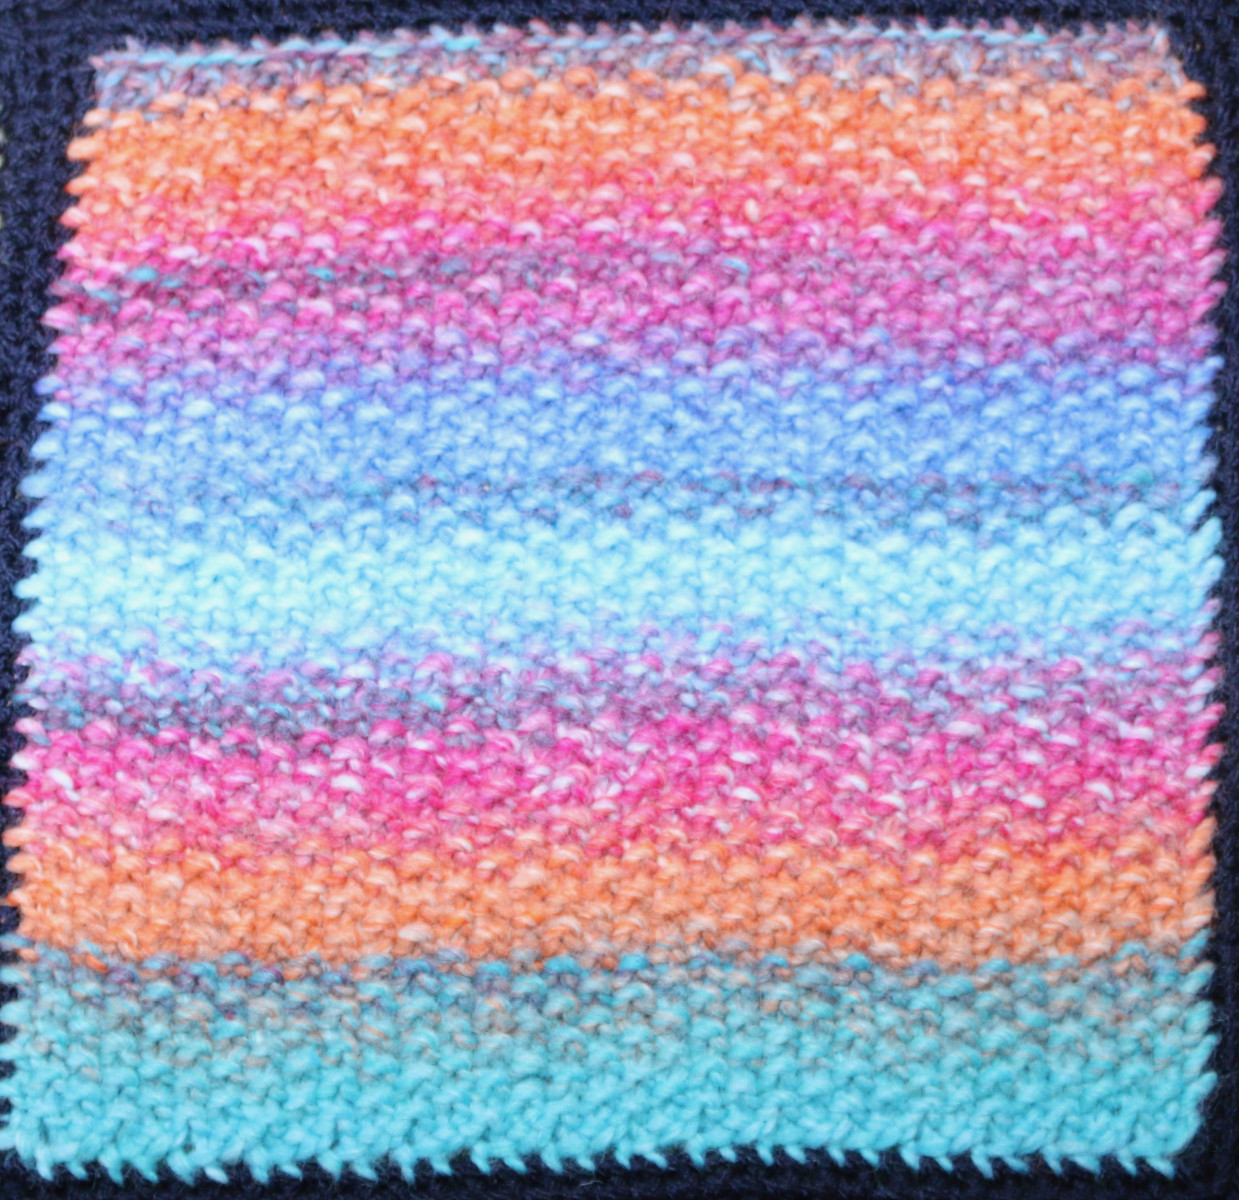 Knitted square: Horizontal stripes in blue, orange and pink